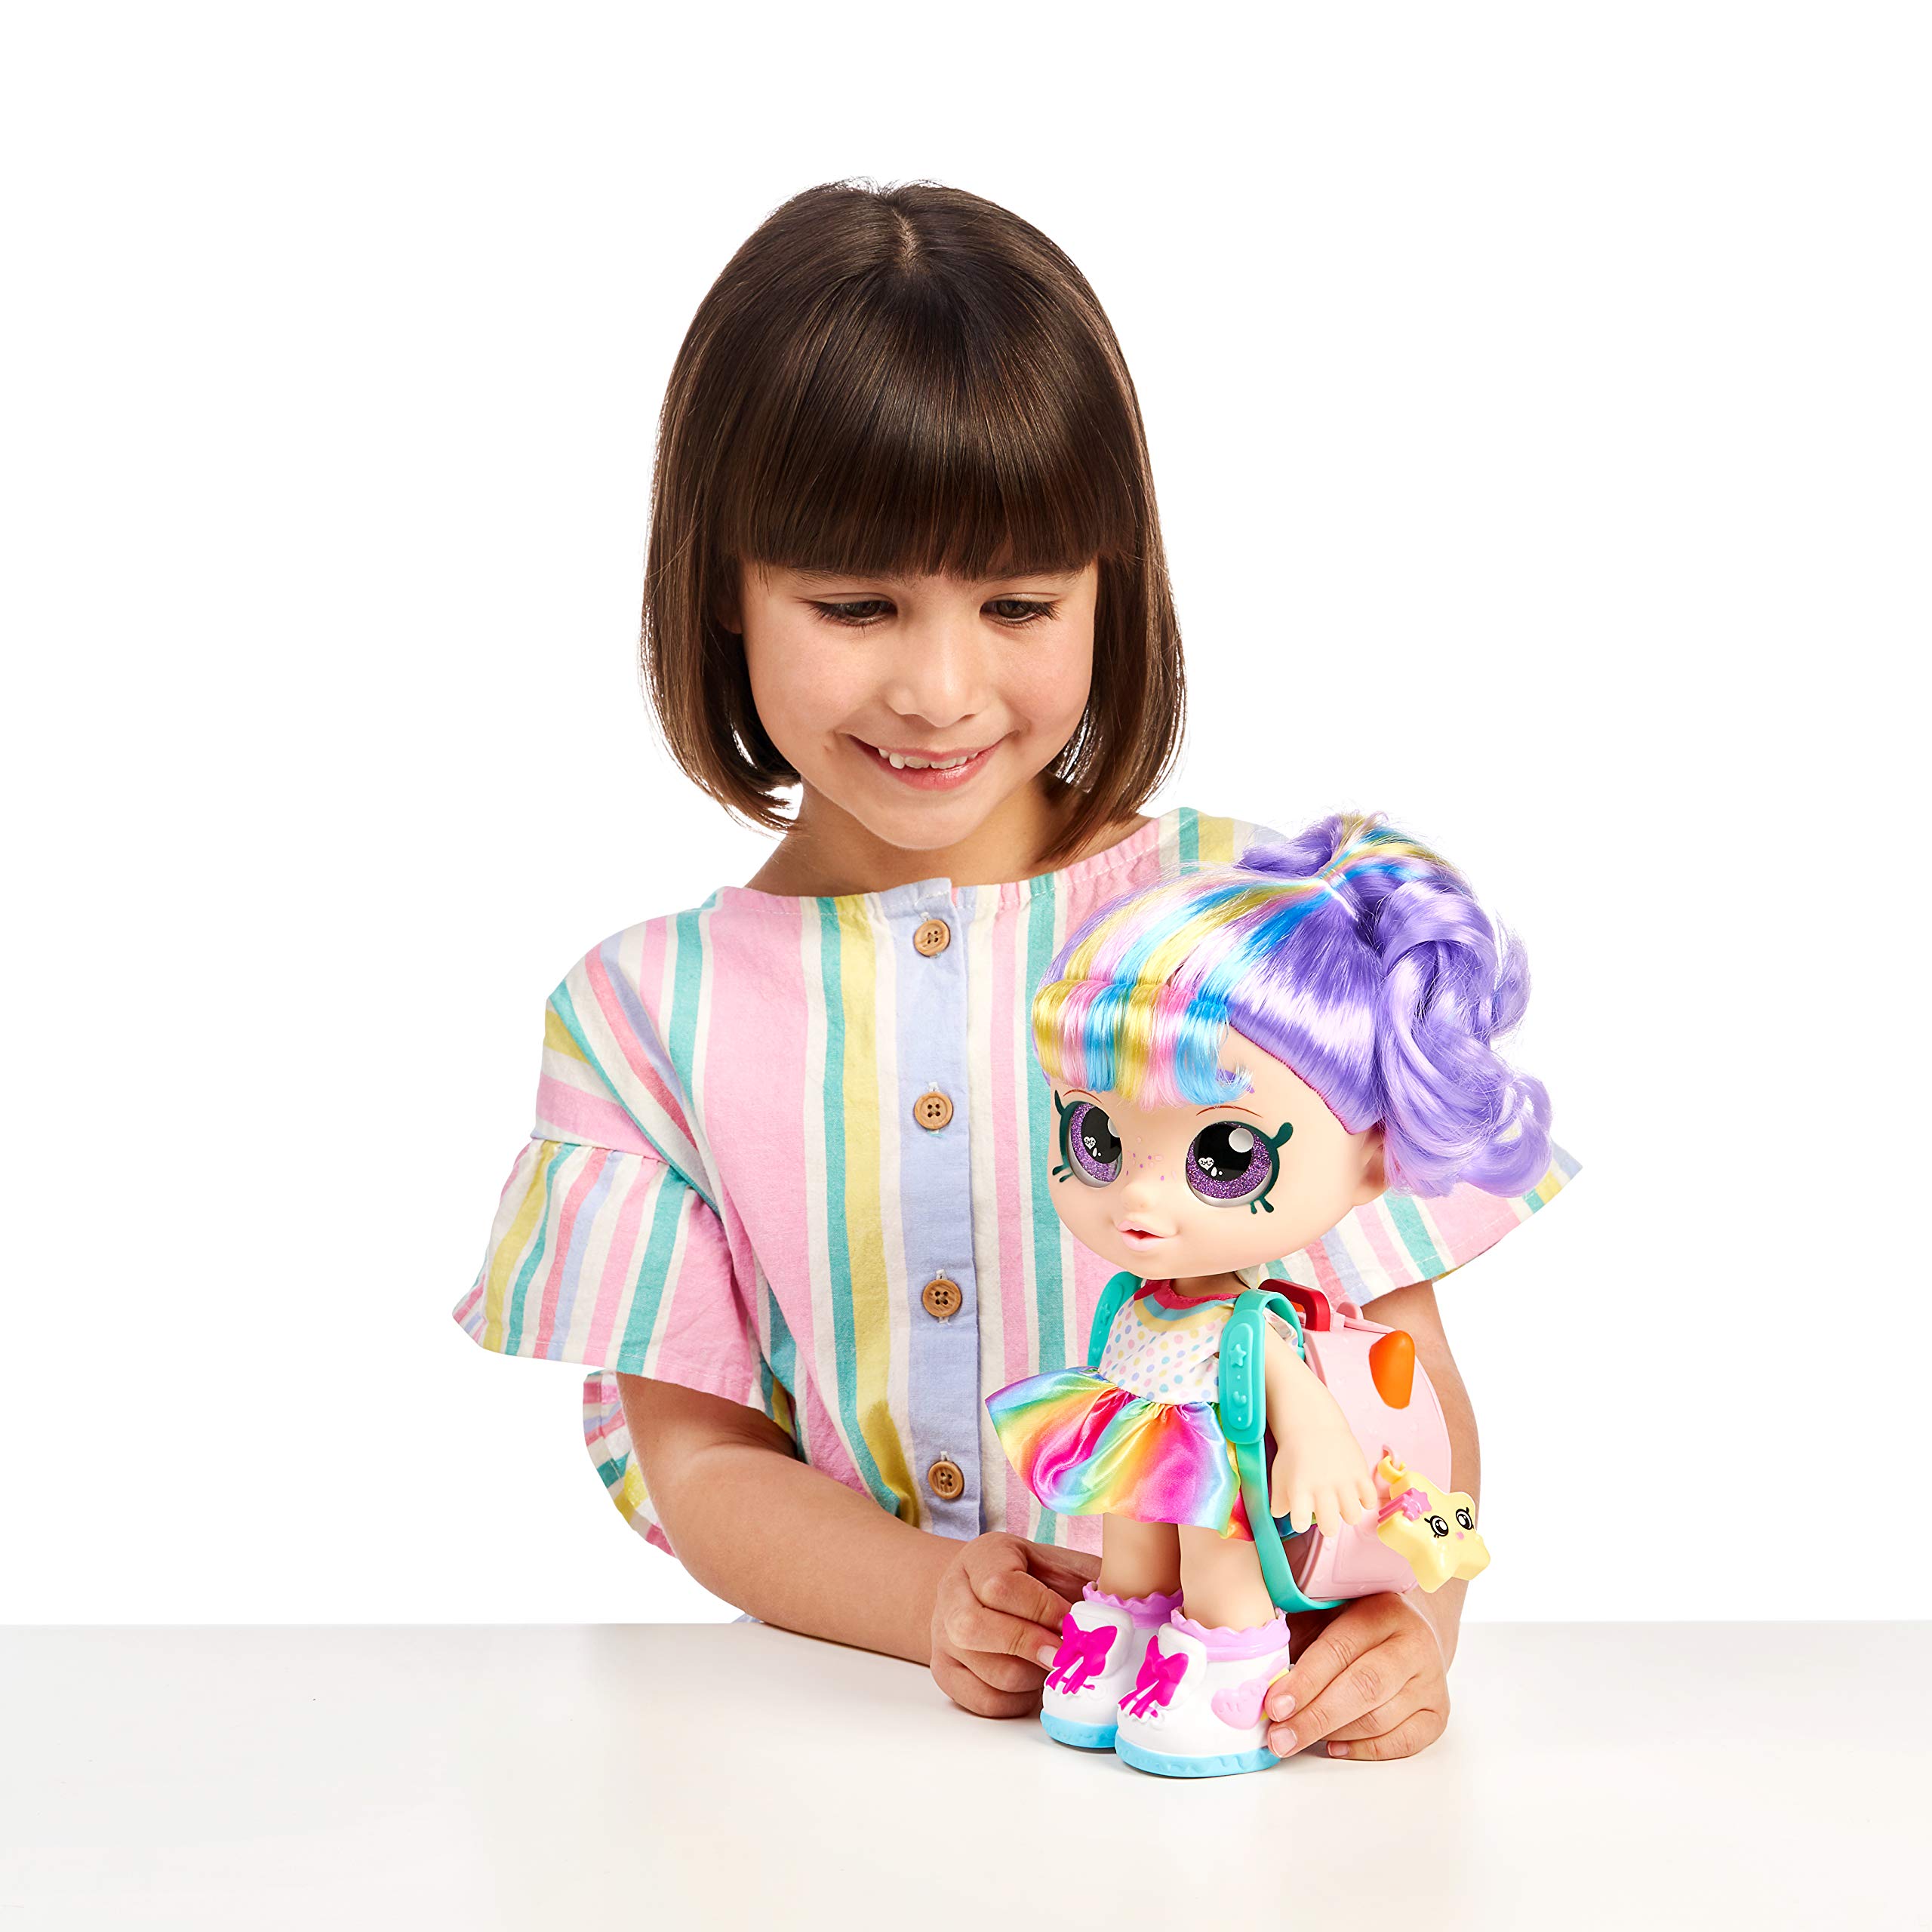 Kindi Kids Snack Time Friends - Pre-School Play Doll, Rainbow Kate - for Ages 3+ | Changeable Clothes and Removable Shoes - Fun Play, for Imaginative Kids